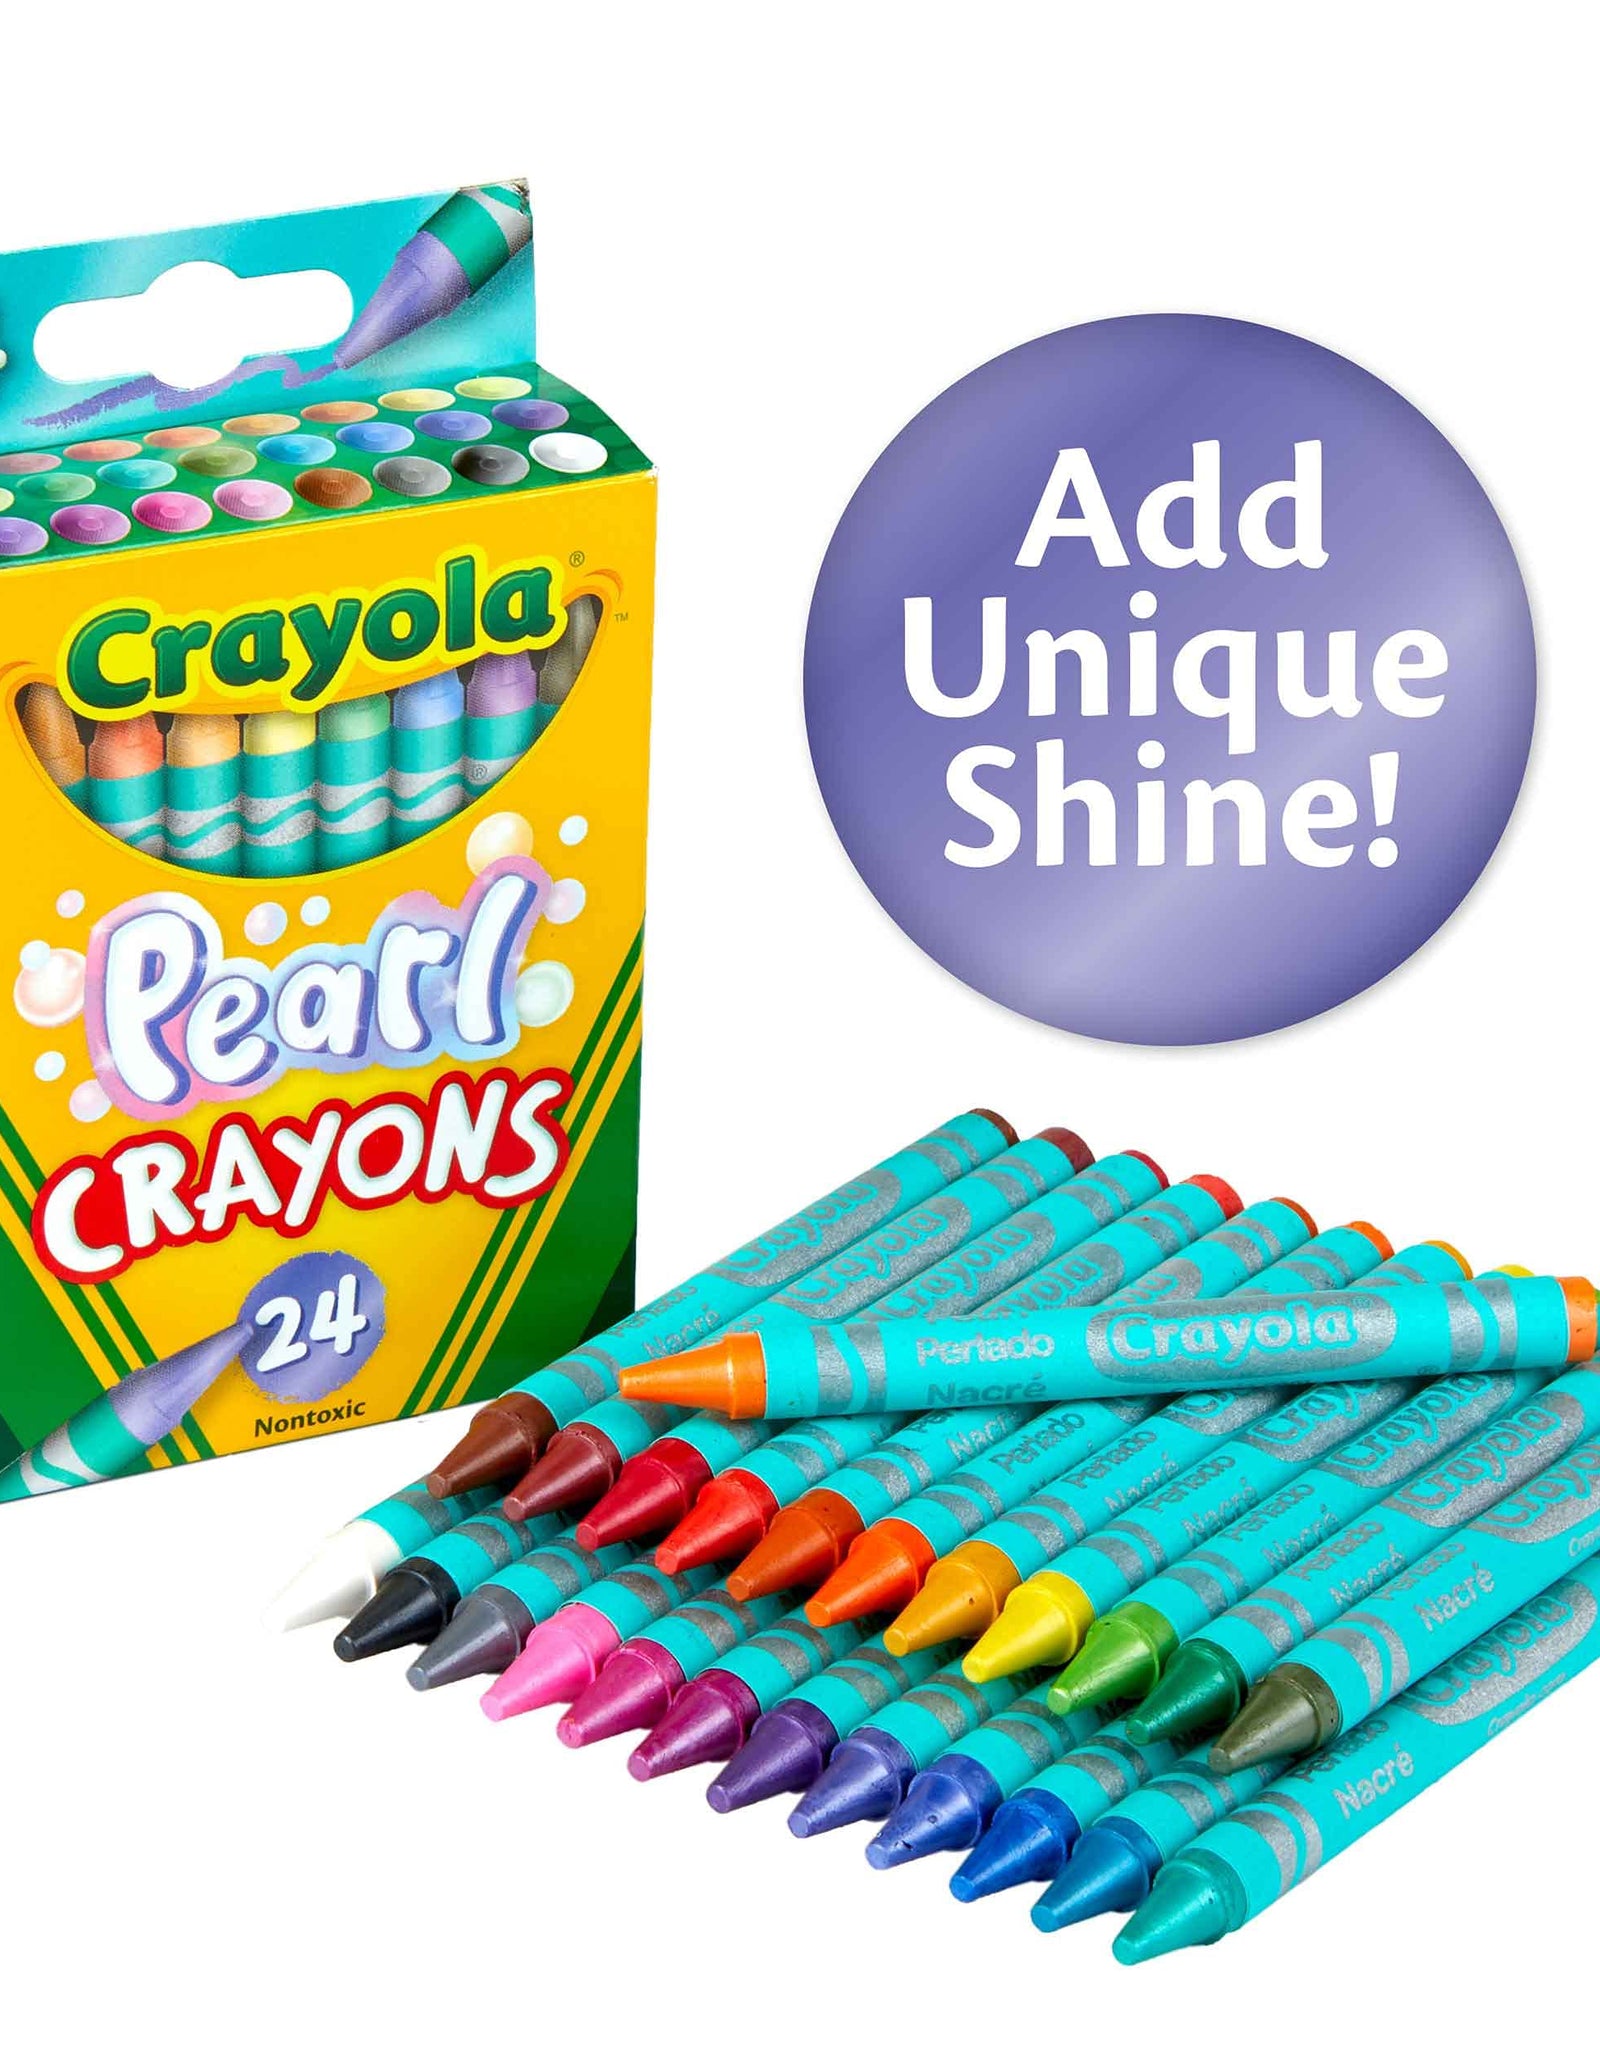 Crayola Pearl Crayons, Pearlescent Colors, 24Count Multi, 4.5" x 2.8" x 1.1"